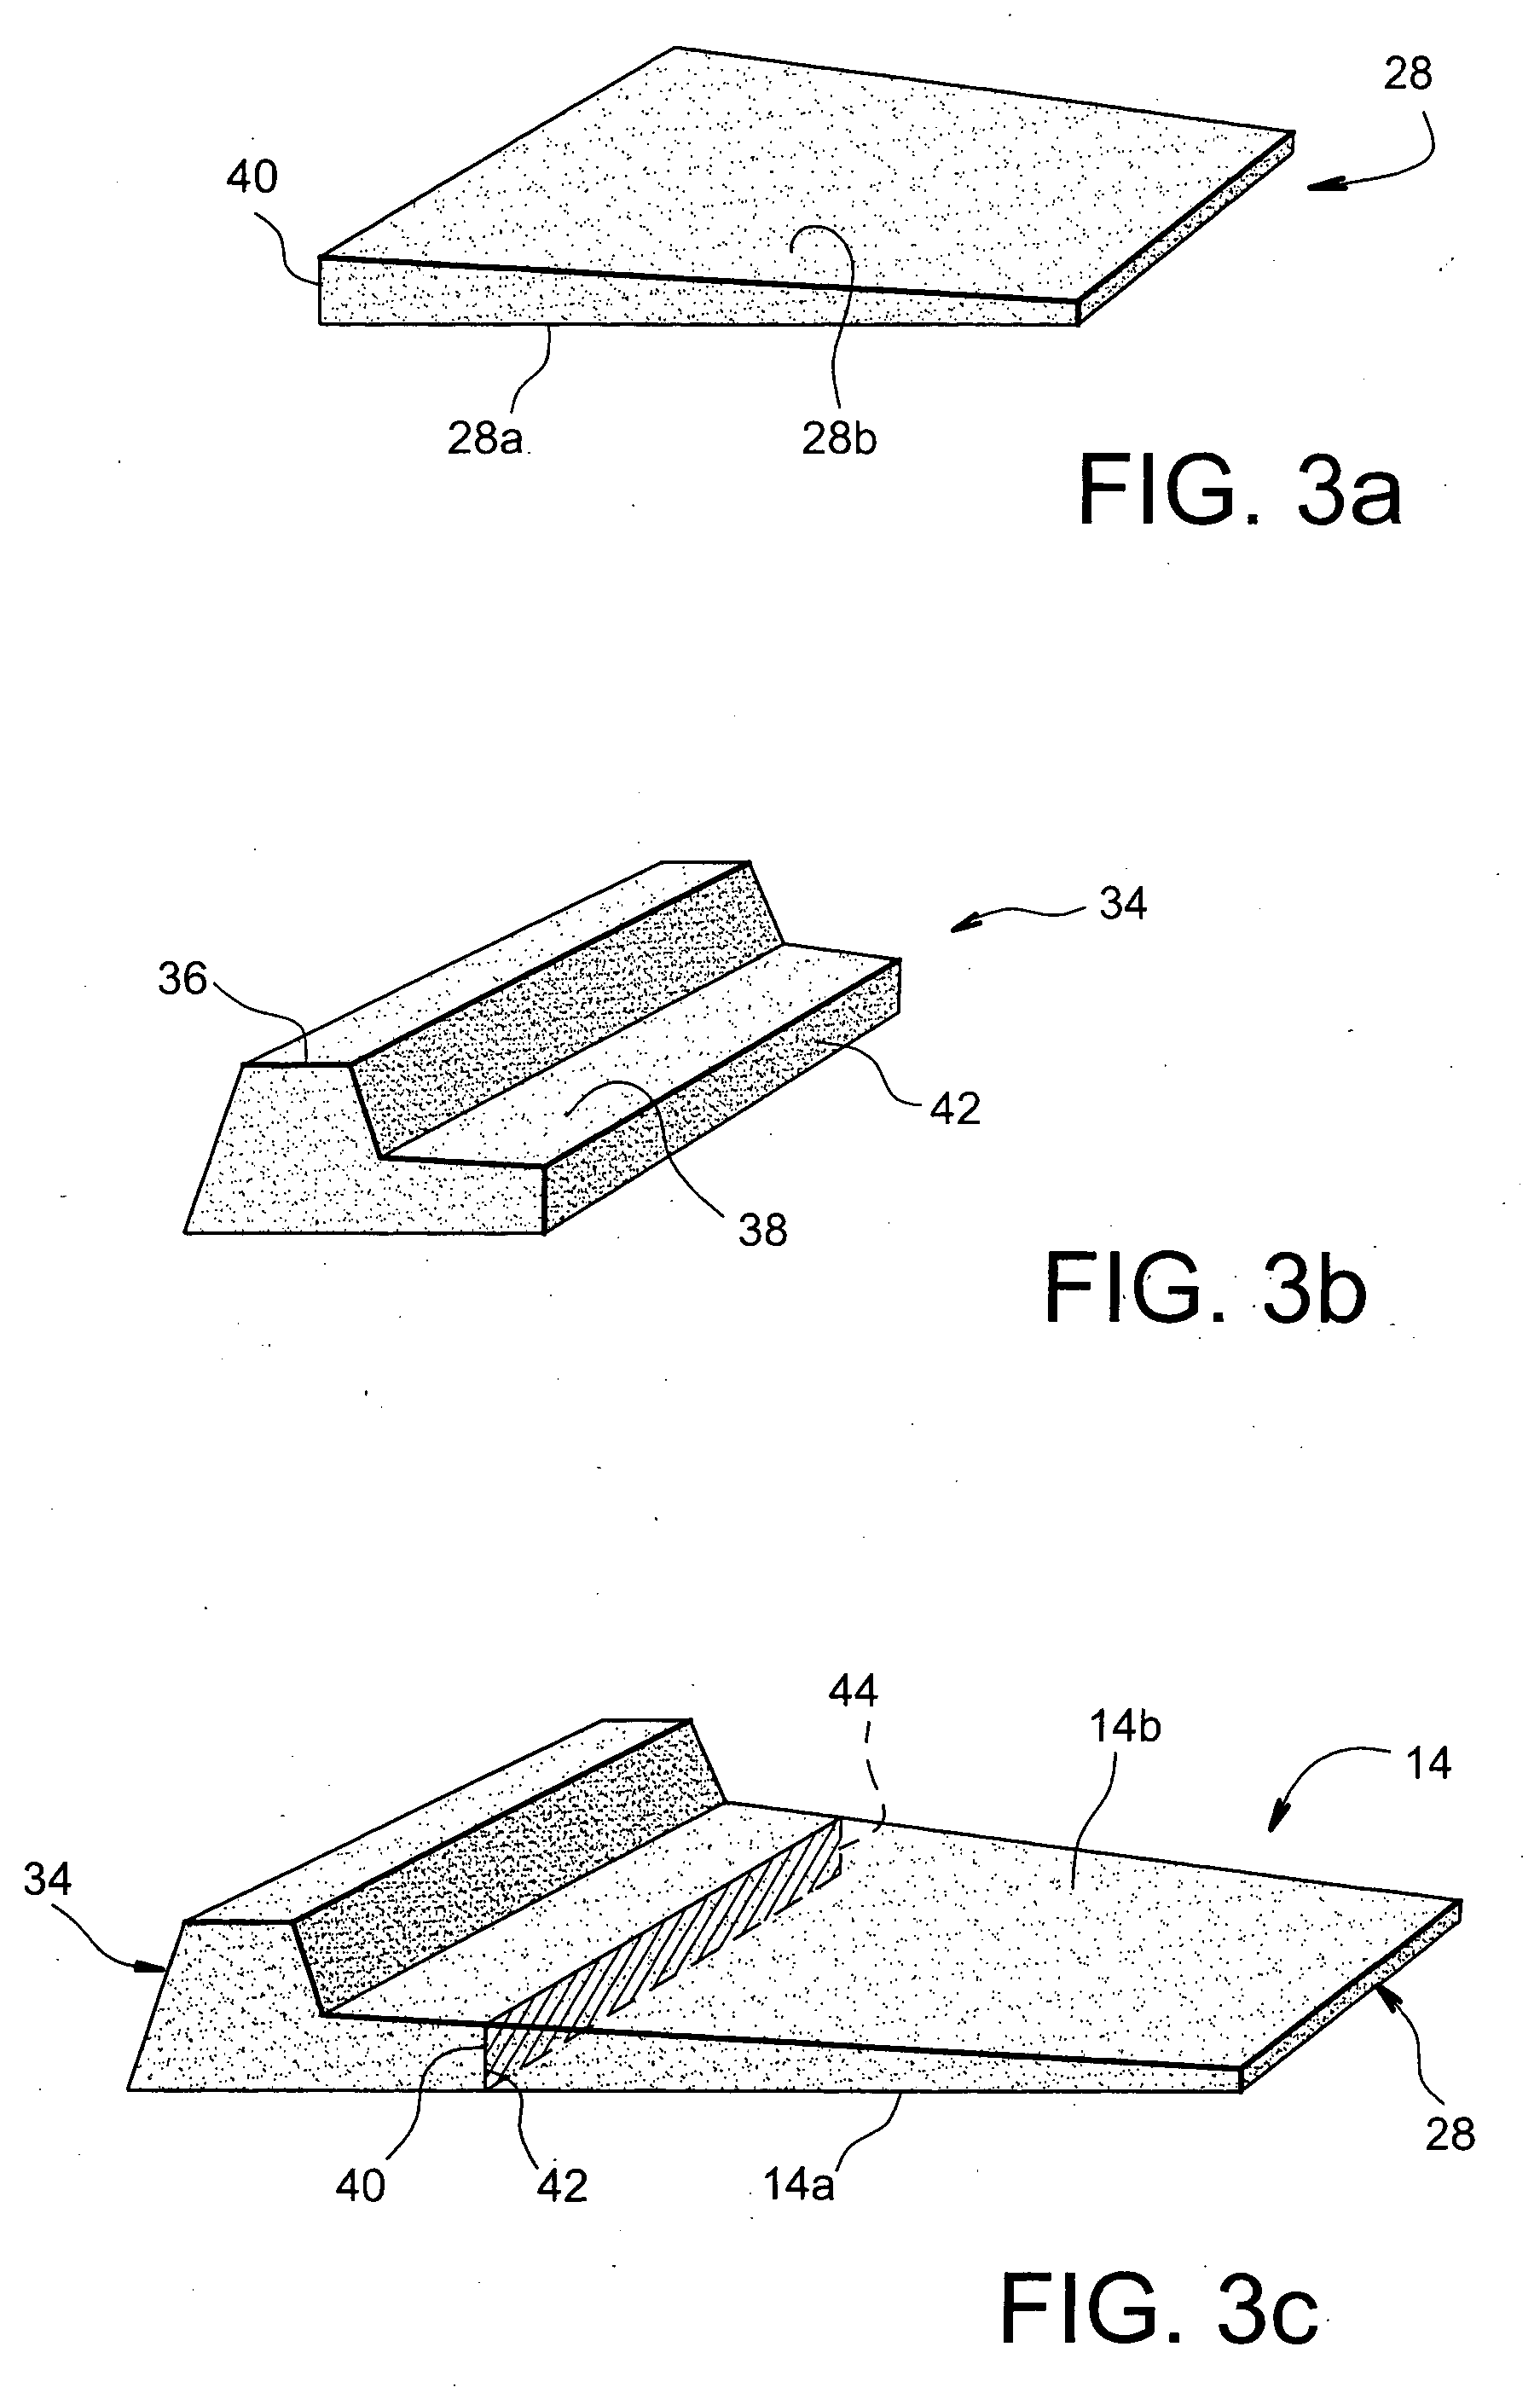 Method of manufacturing a hollow blade for a turbine engine